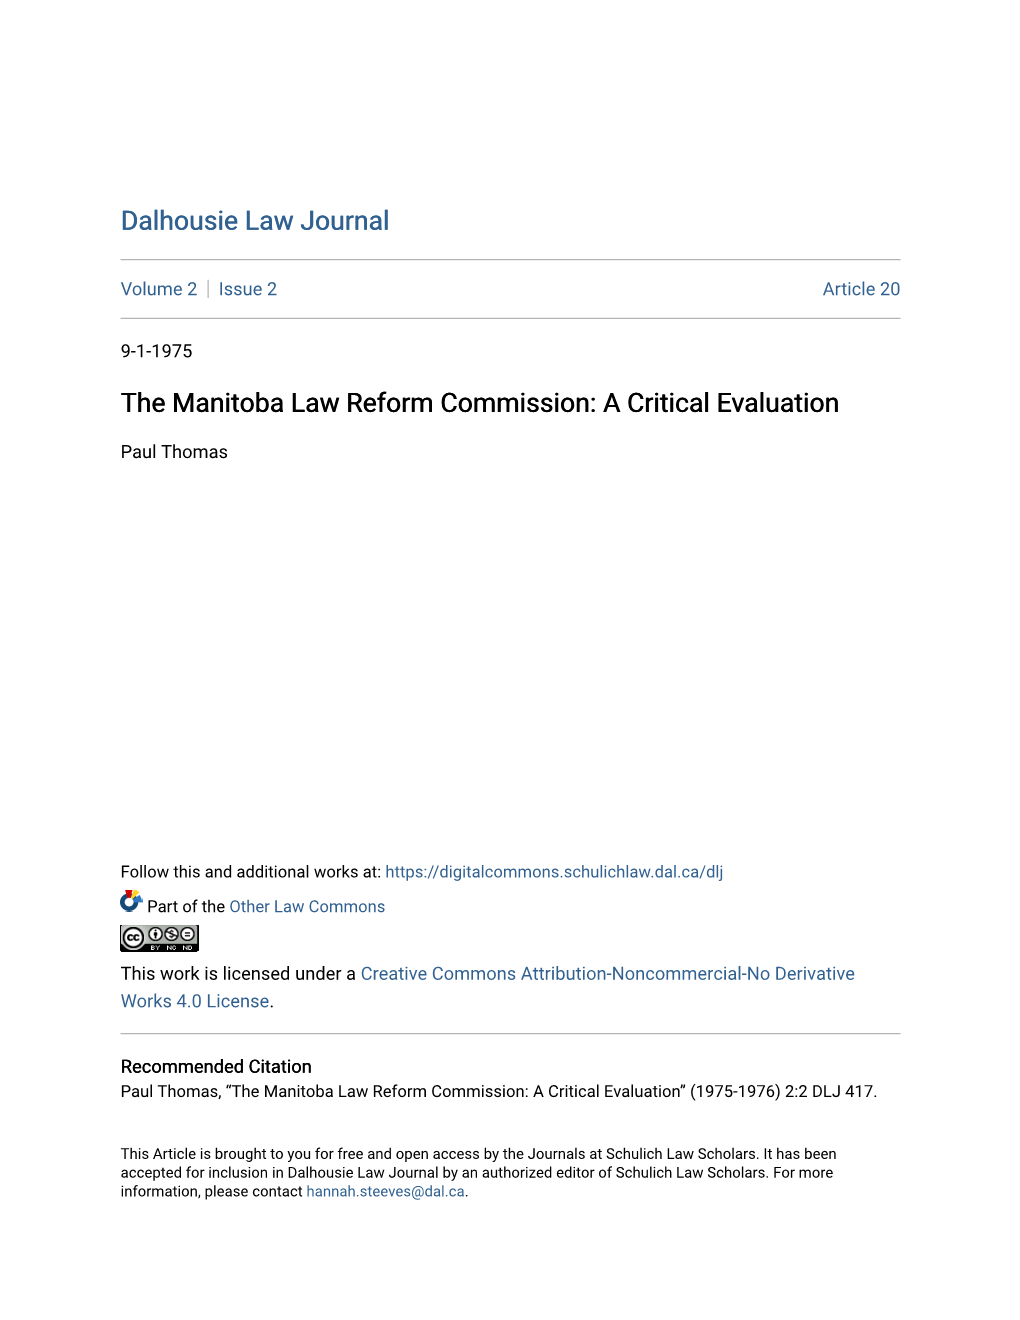 The Manitoba Law Reform Commission: a Critical Evaluation